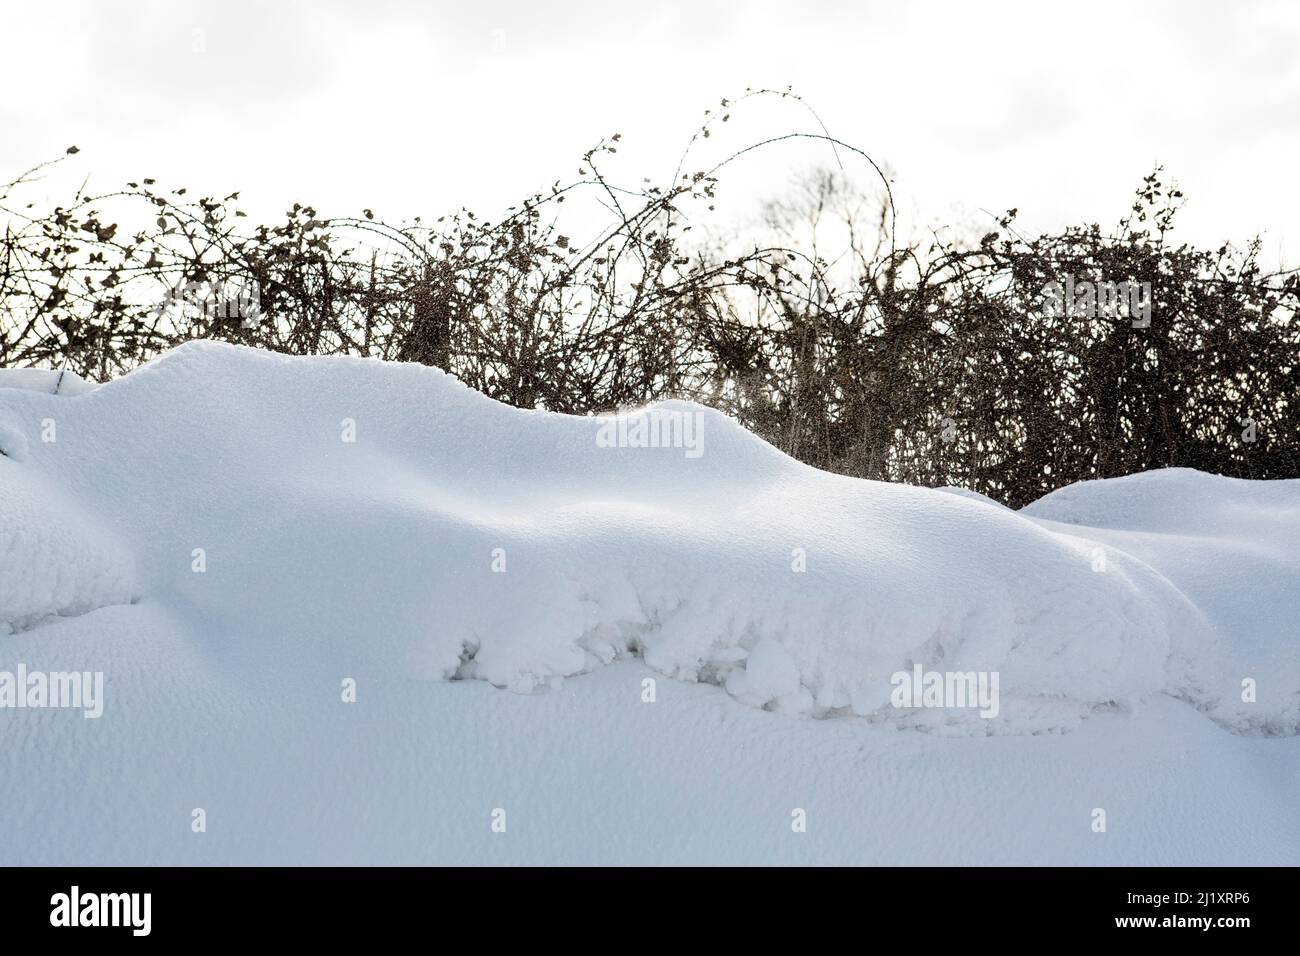 A rural hedgerow in winter covered in drifts of deep snow with  bramble and thorn bushes appear through the blown piles. Stock Photo